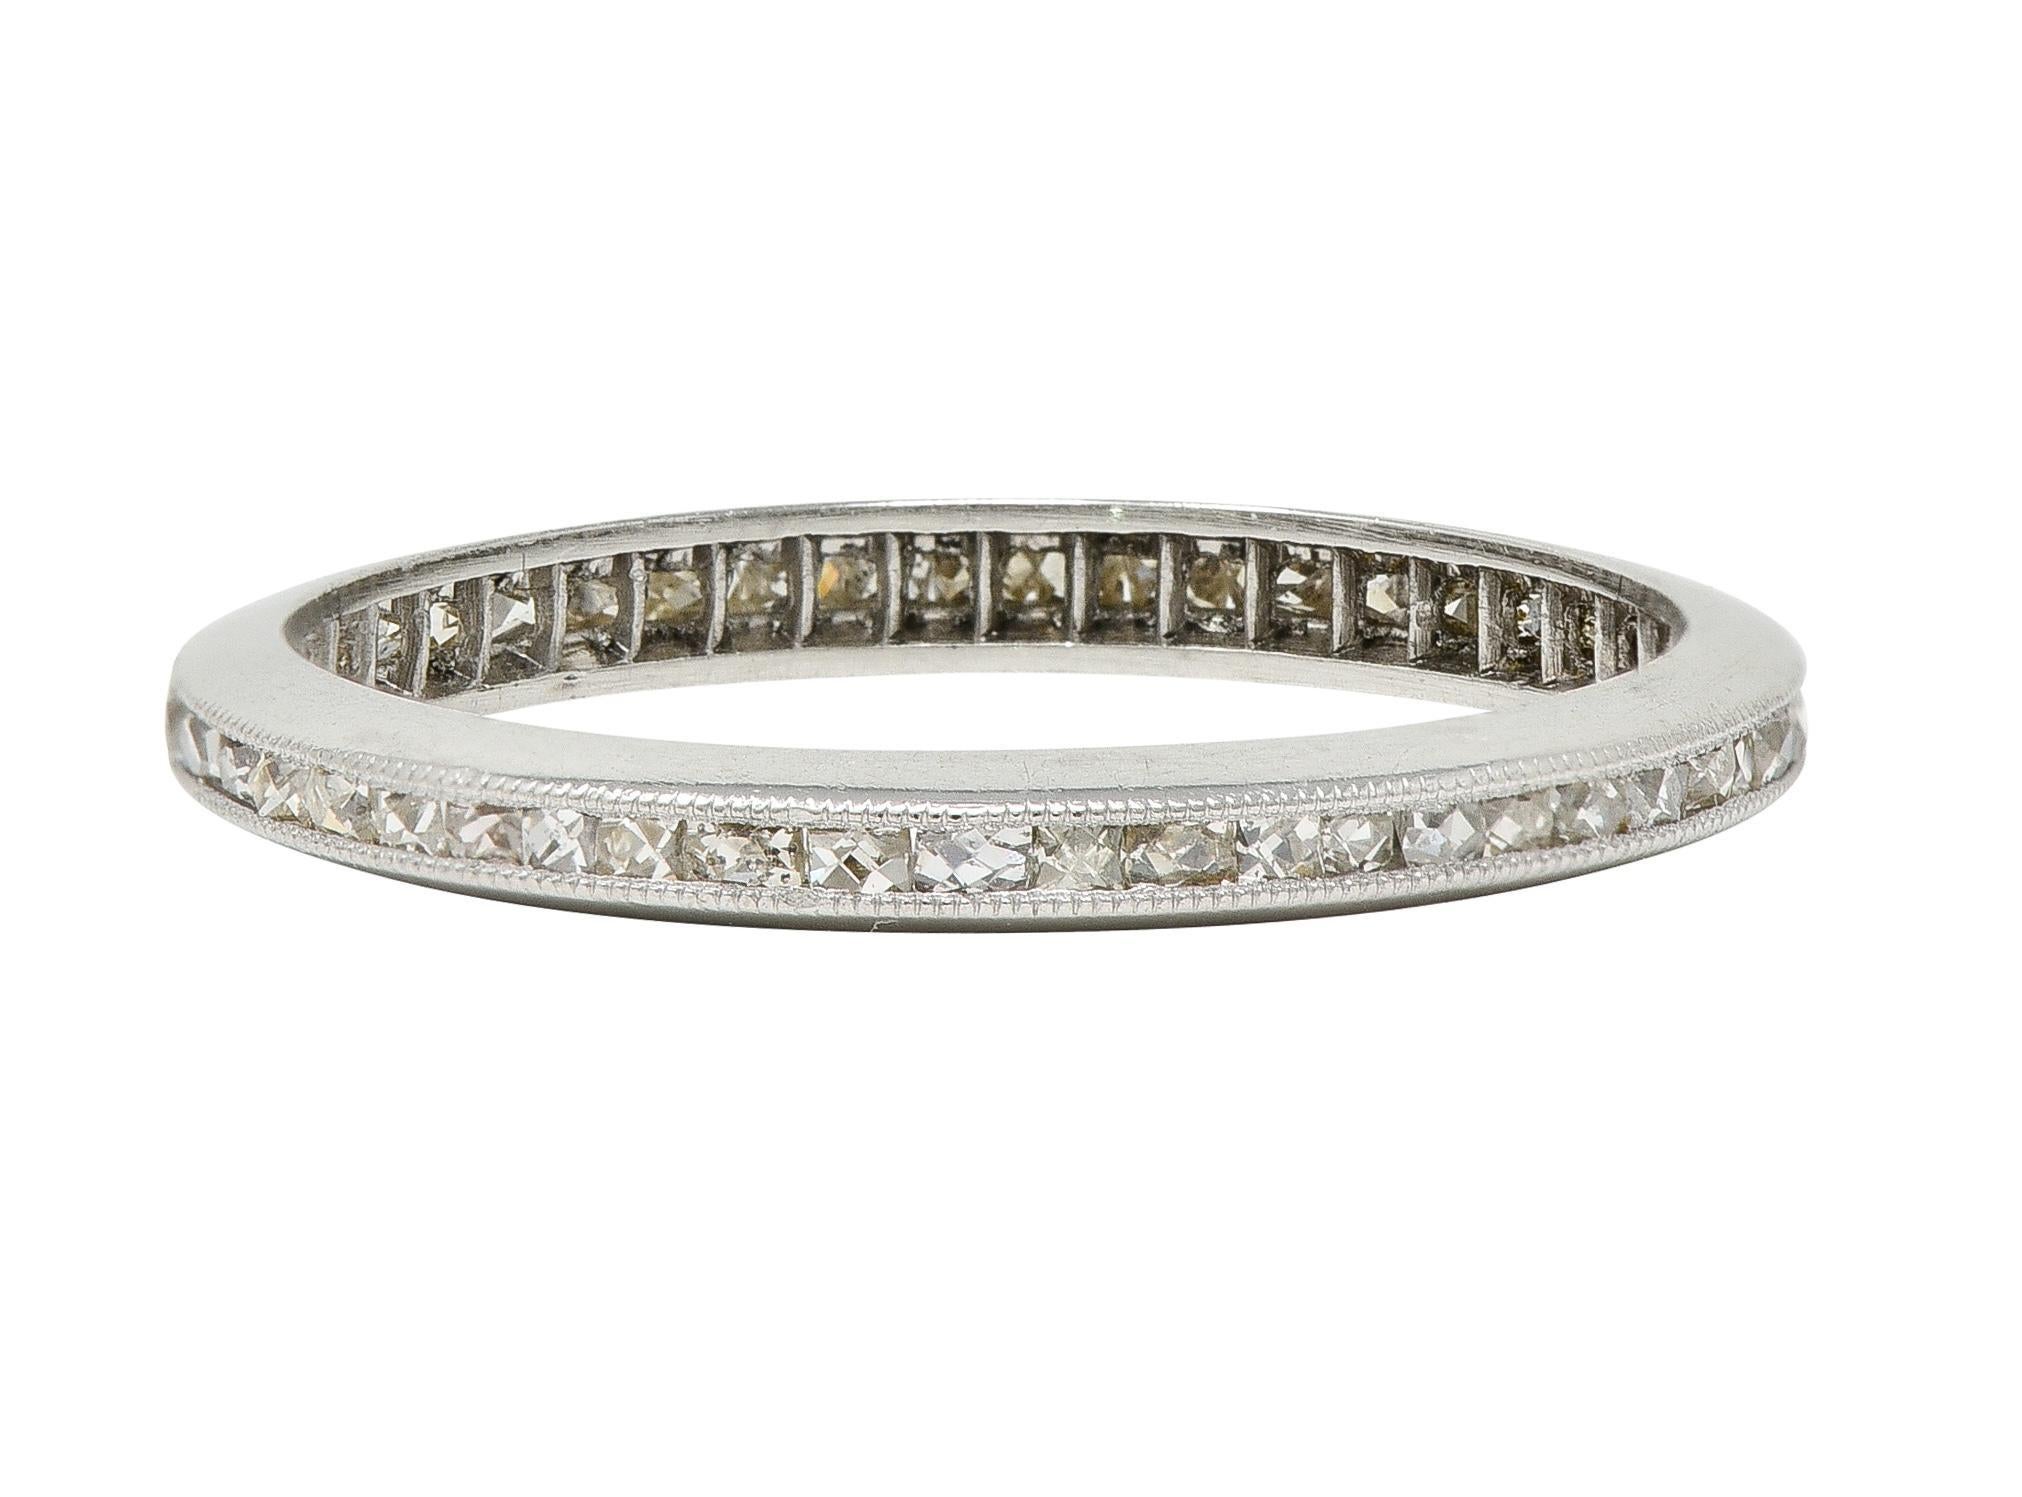 Art Deco 0.45 CTW French Cut Diamond Platinum Channel Wedding Band Ring In Excellent Condition For Sale In Philadelphia, PA